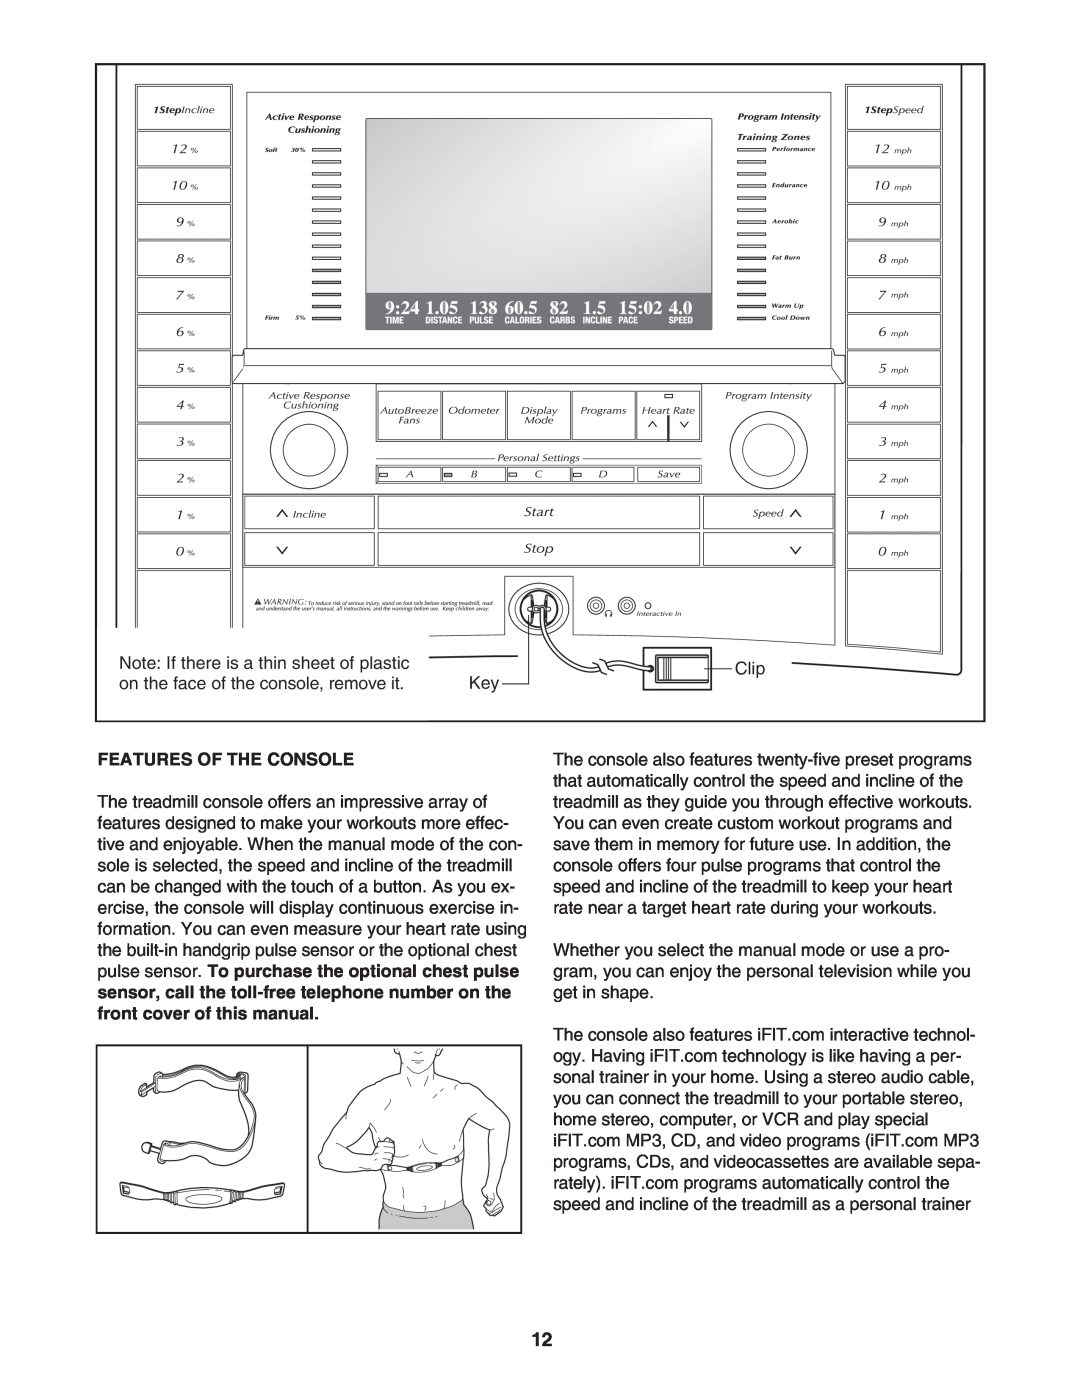 NordicTrack NTL2495.3 manual Features Of The Console 